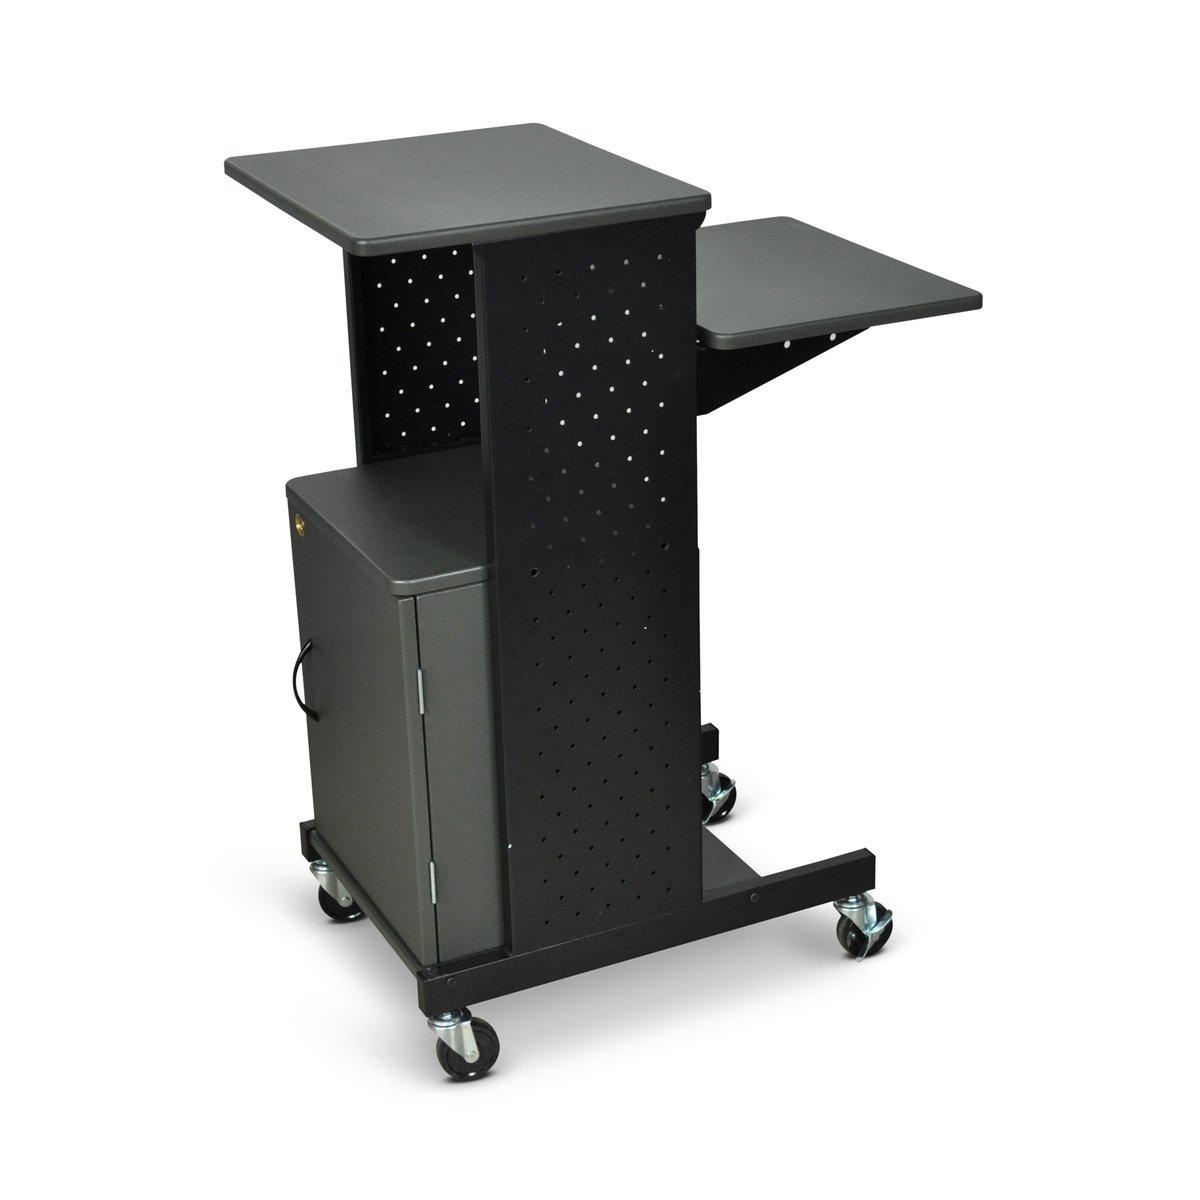 40" Mobile Presenters Station with Cabinet